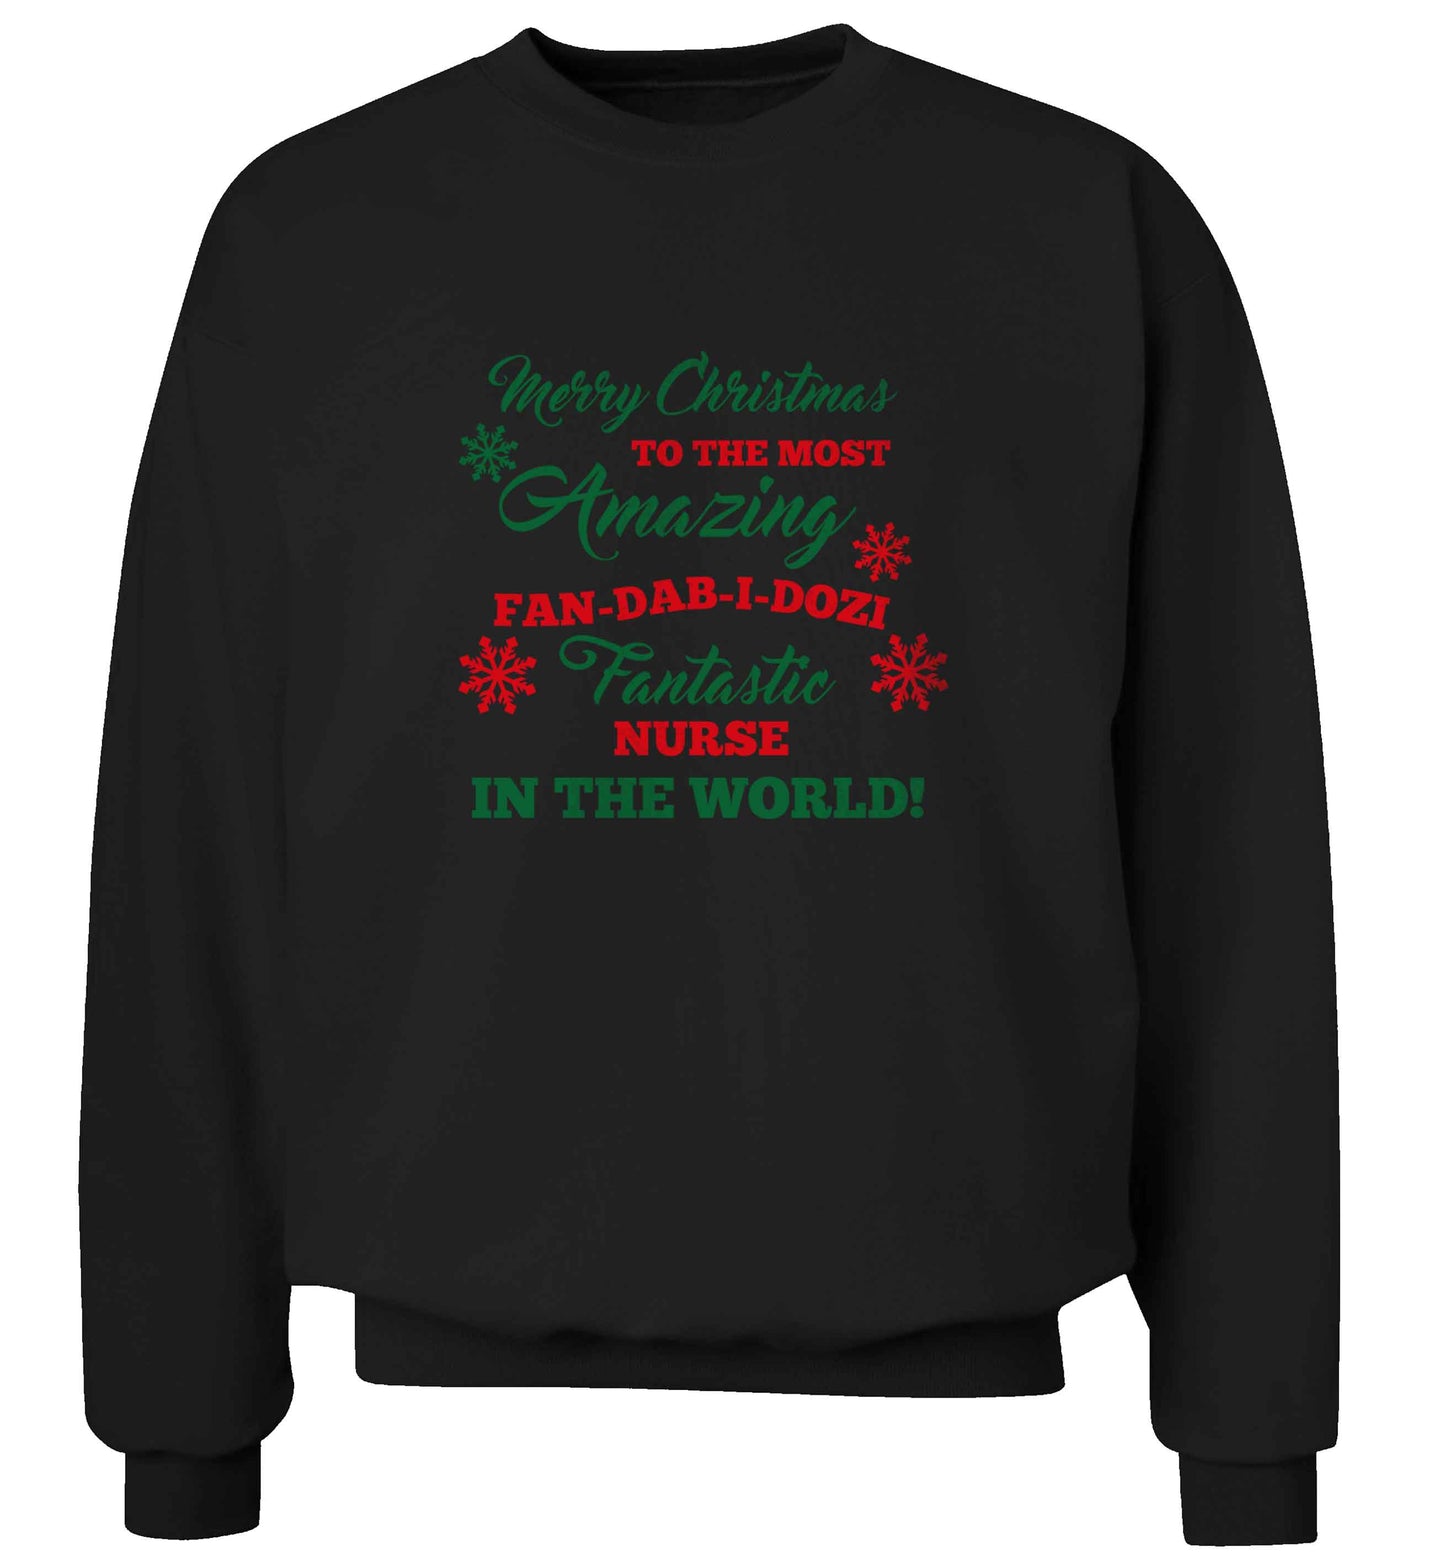 Merry Christmas to the most amazing nurse in the world! adult's unisex black sweater 2XL